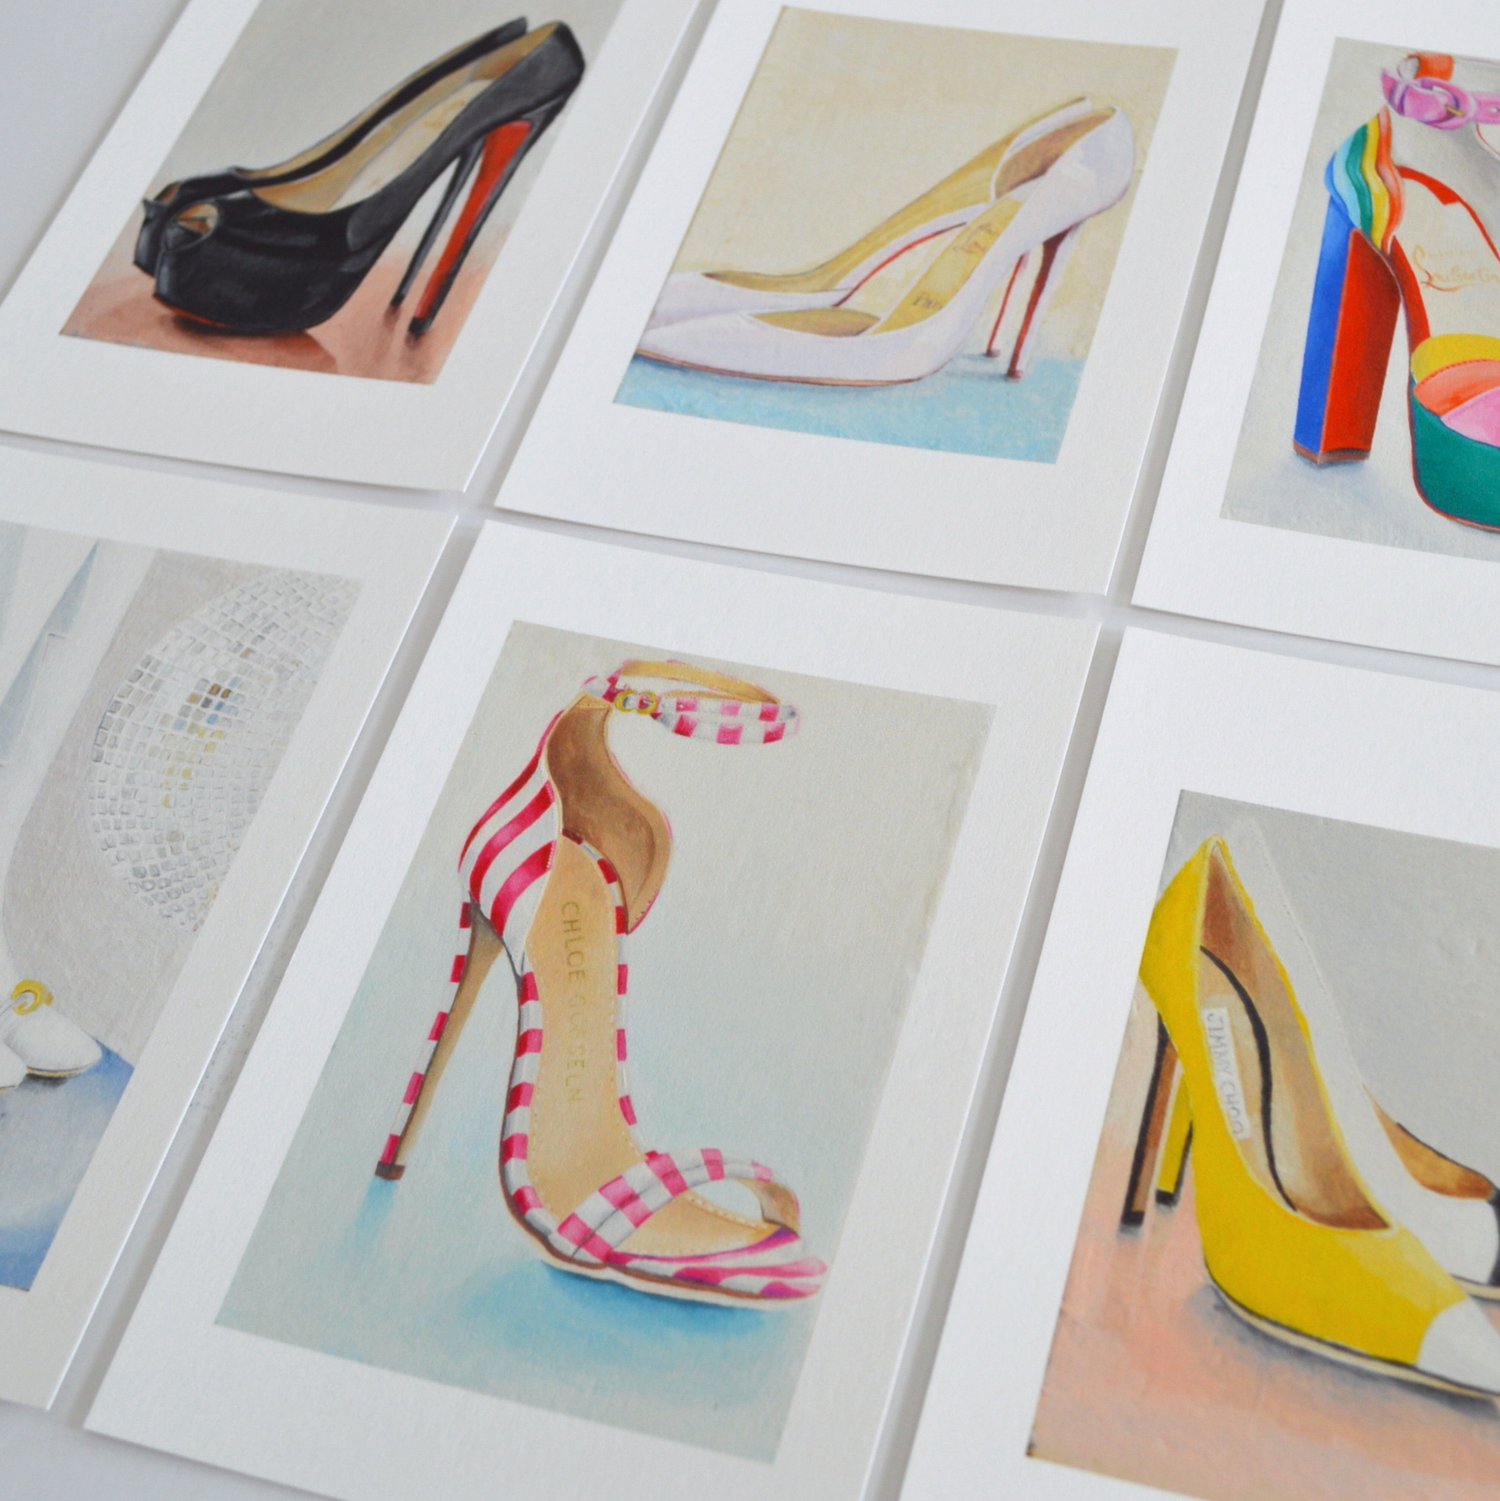 Image of 'Six Shoes' Limited Edition Print Box Set